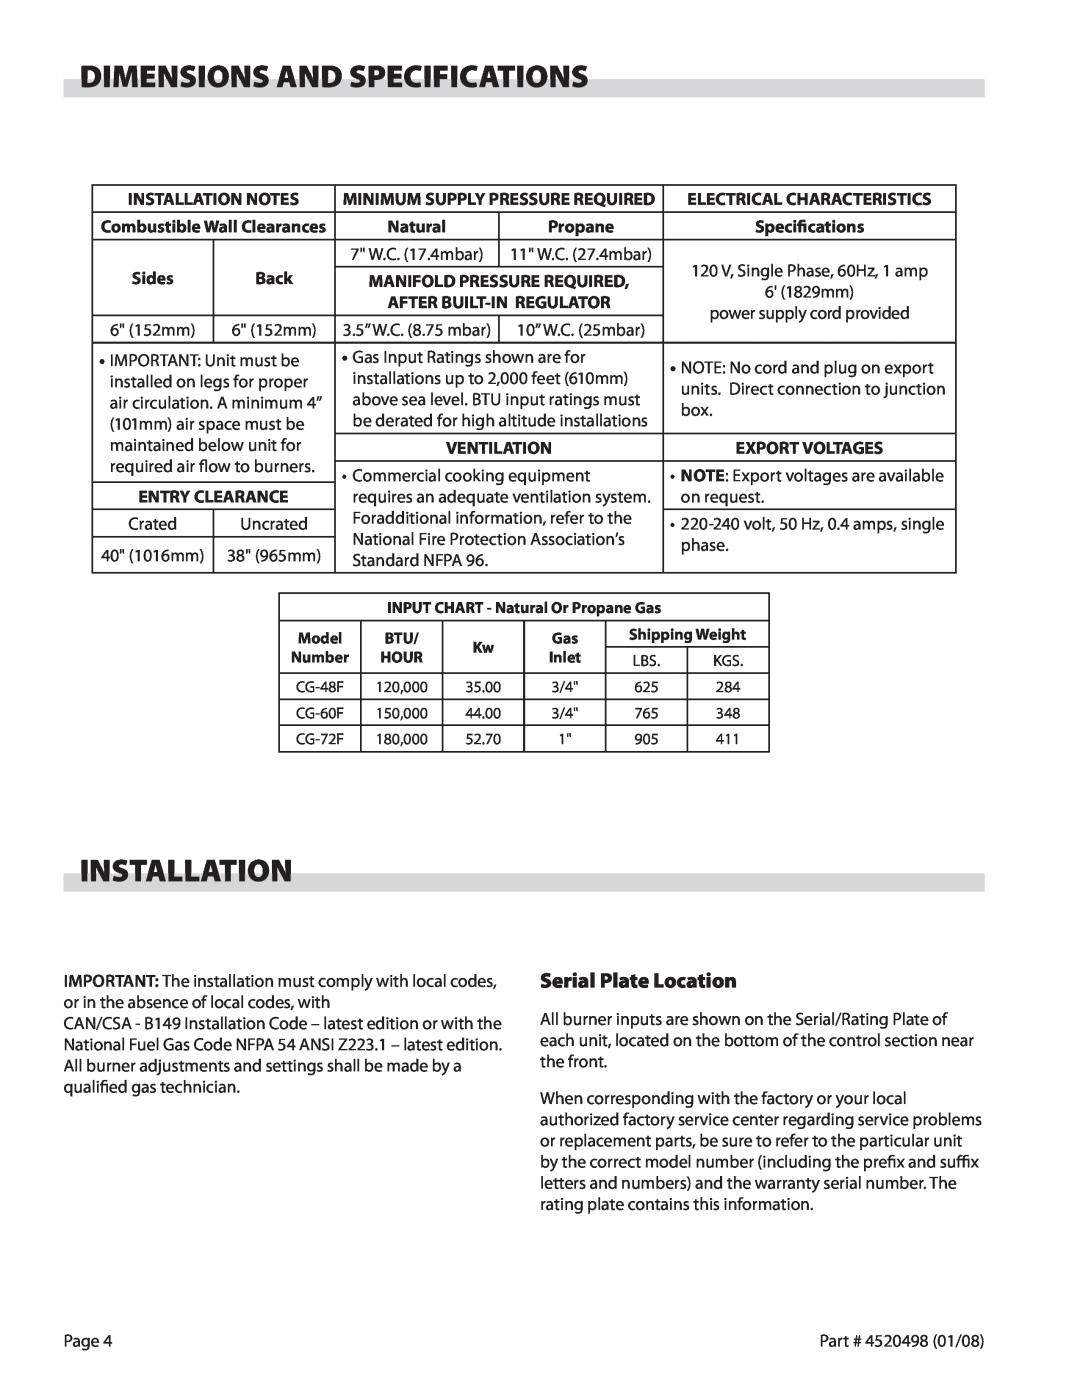 Garland CG-48F, CG-72F, CG-60F operation manual Dimensions And Specifications, Installation Notes, Natural, Sides, Back 